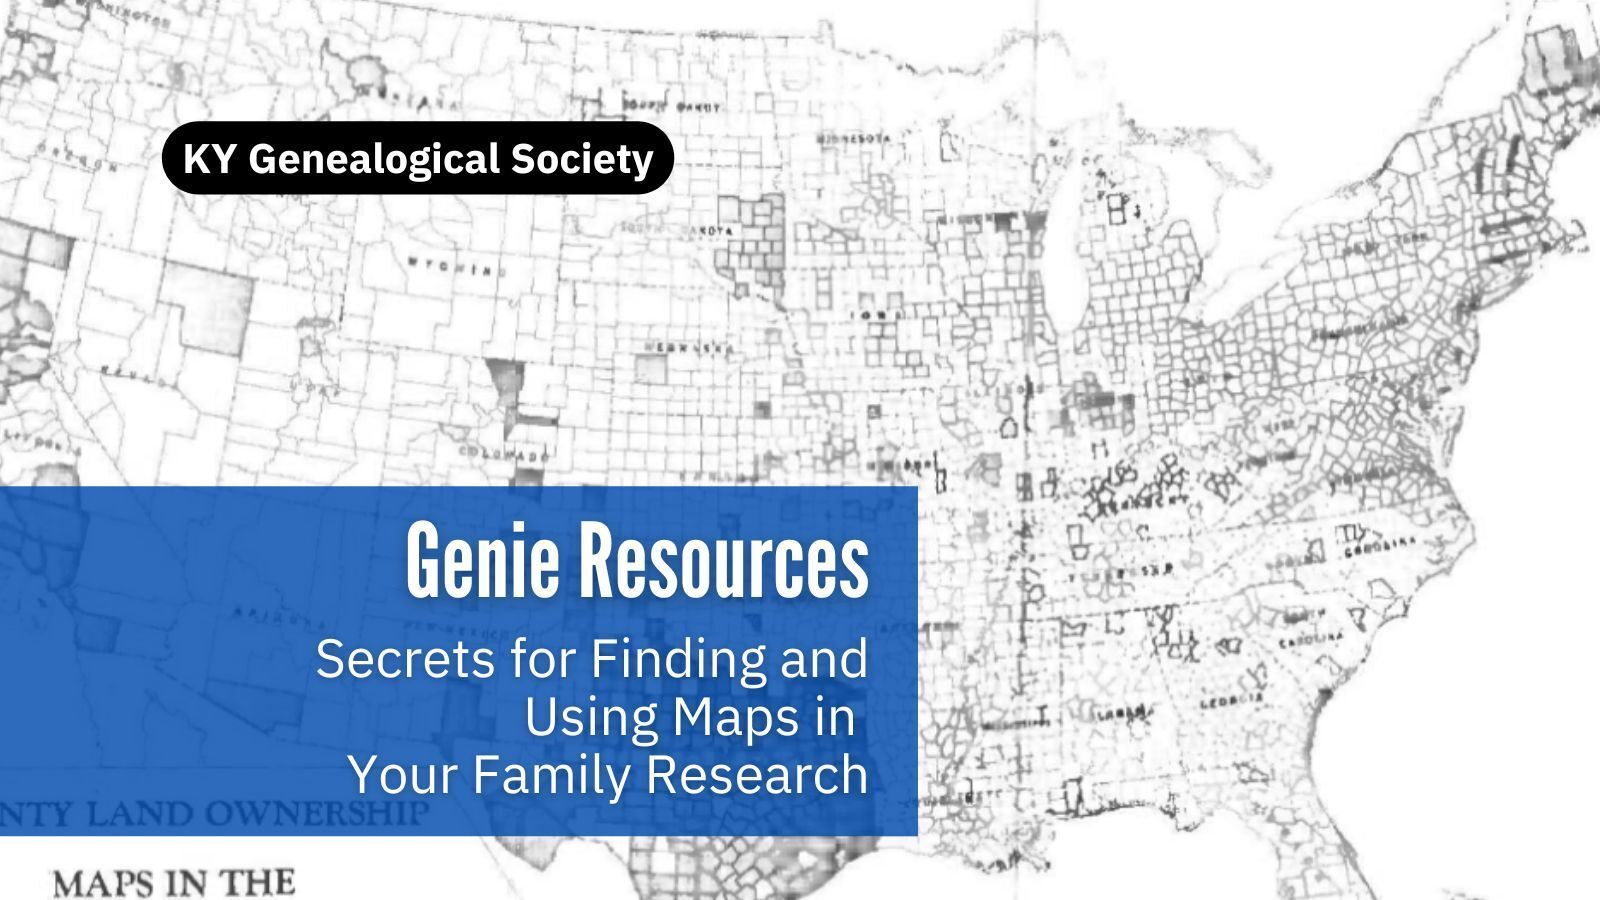 Secrets for Finding and Using Maps For Your Family Research